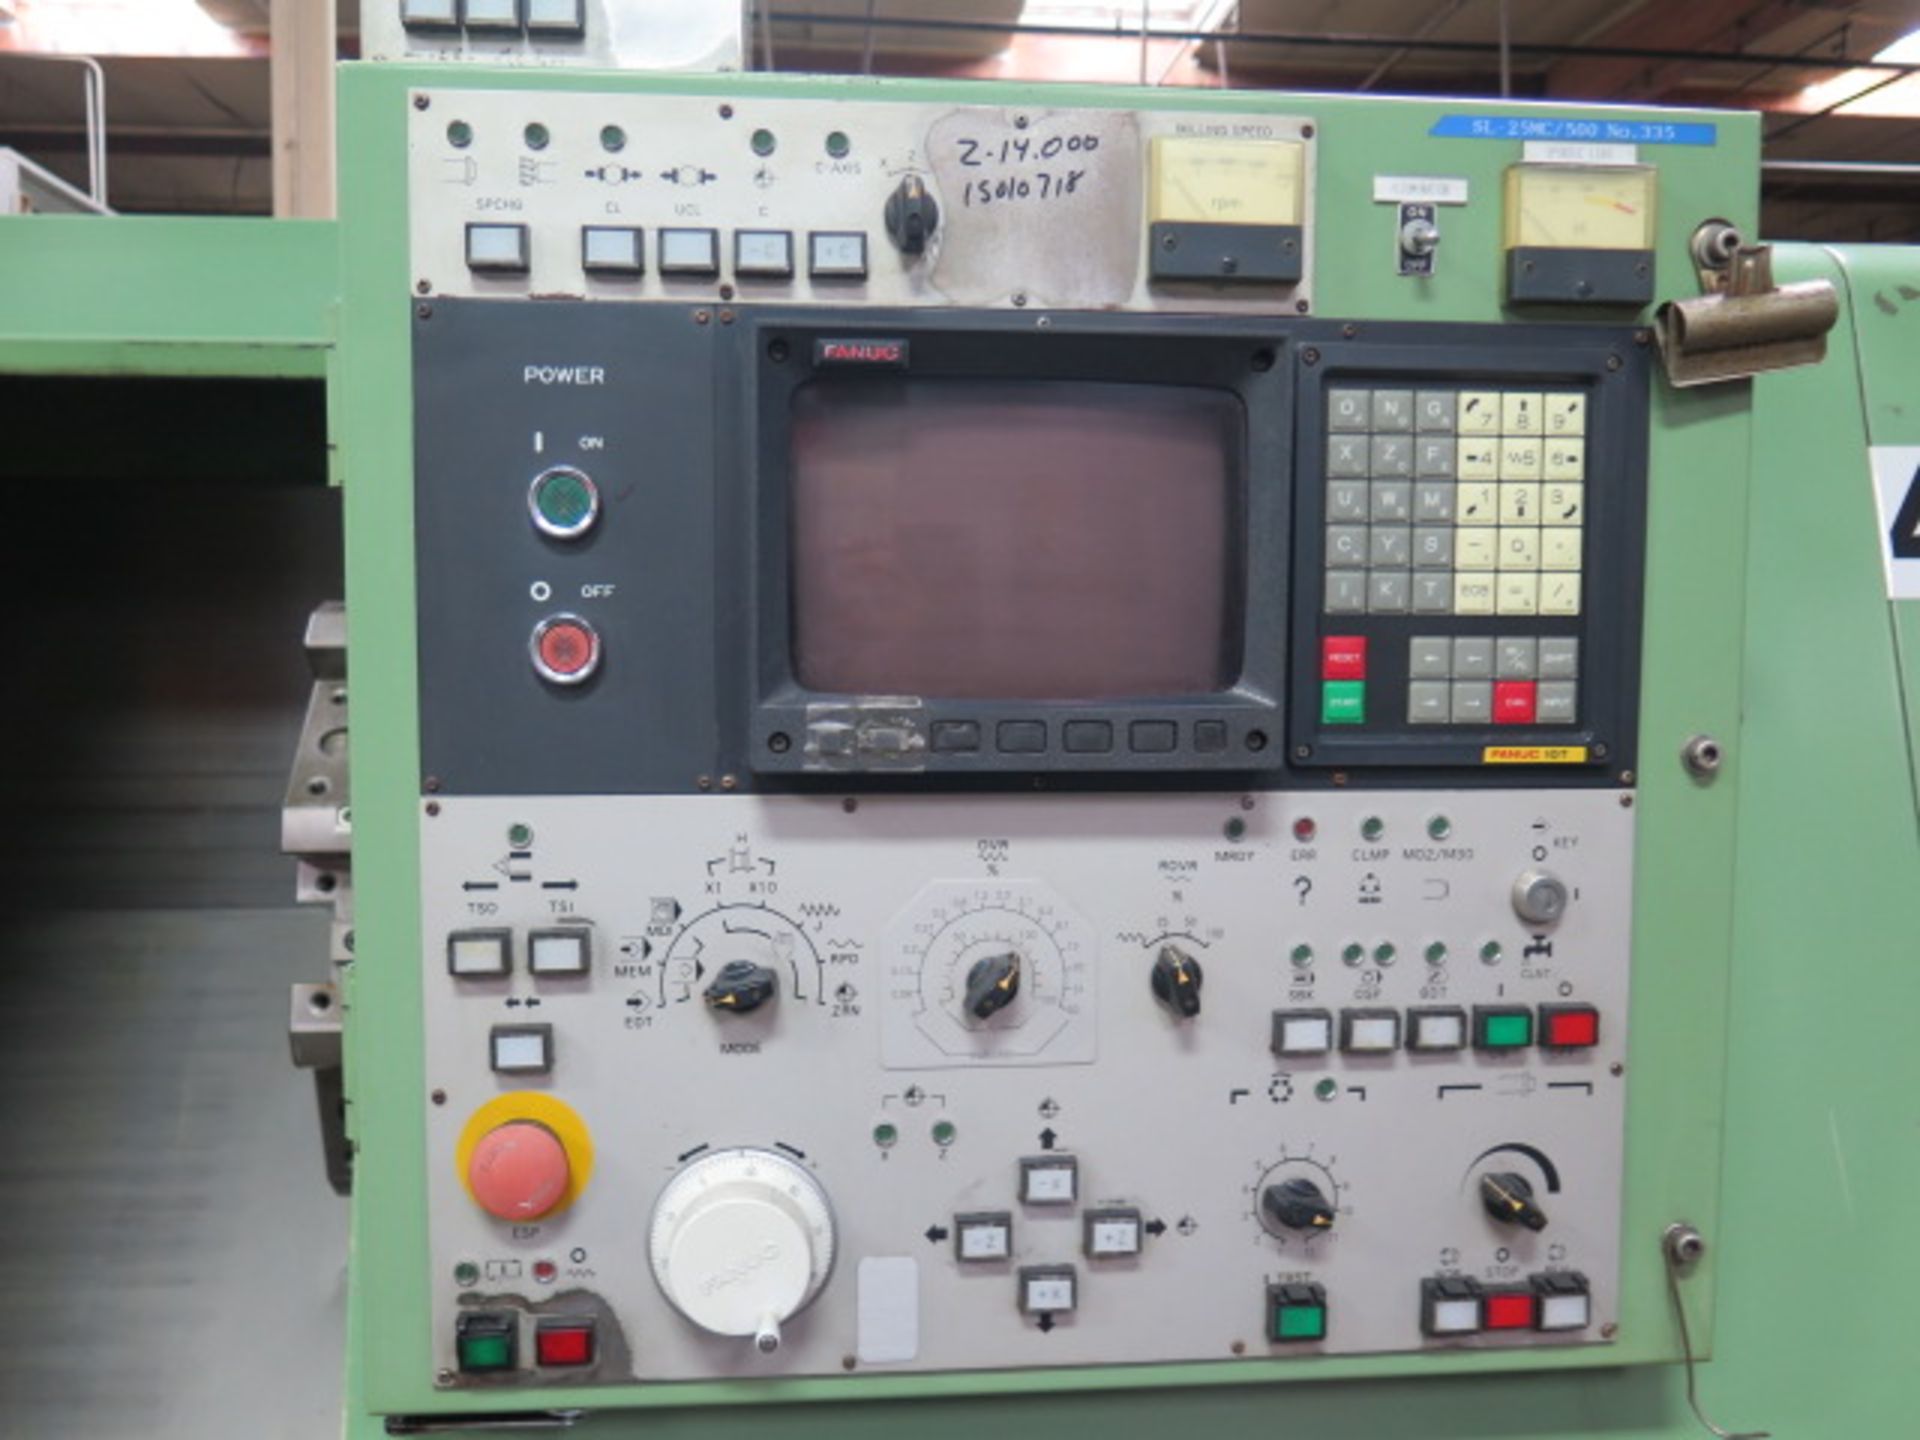 Mori Seiki SL-25MC5 CNC Turning Center s/n 335 w/ Fanuc 10T Controls, 12-Station Turret, SOLD AS IS - Image 9 of 12